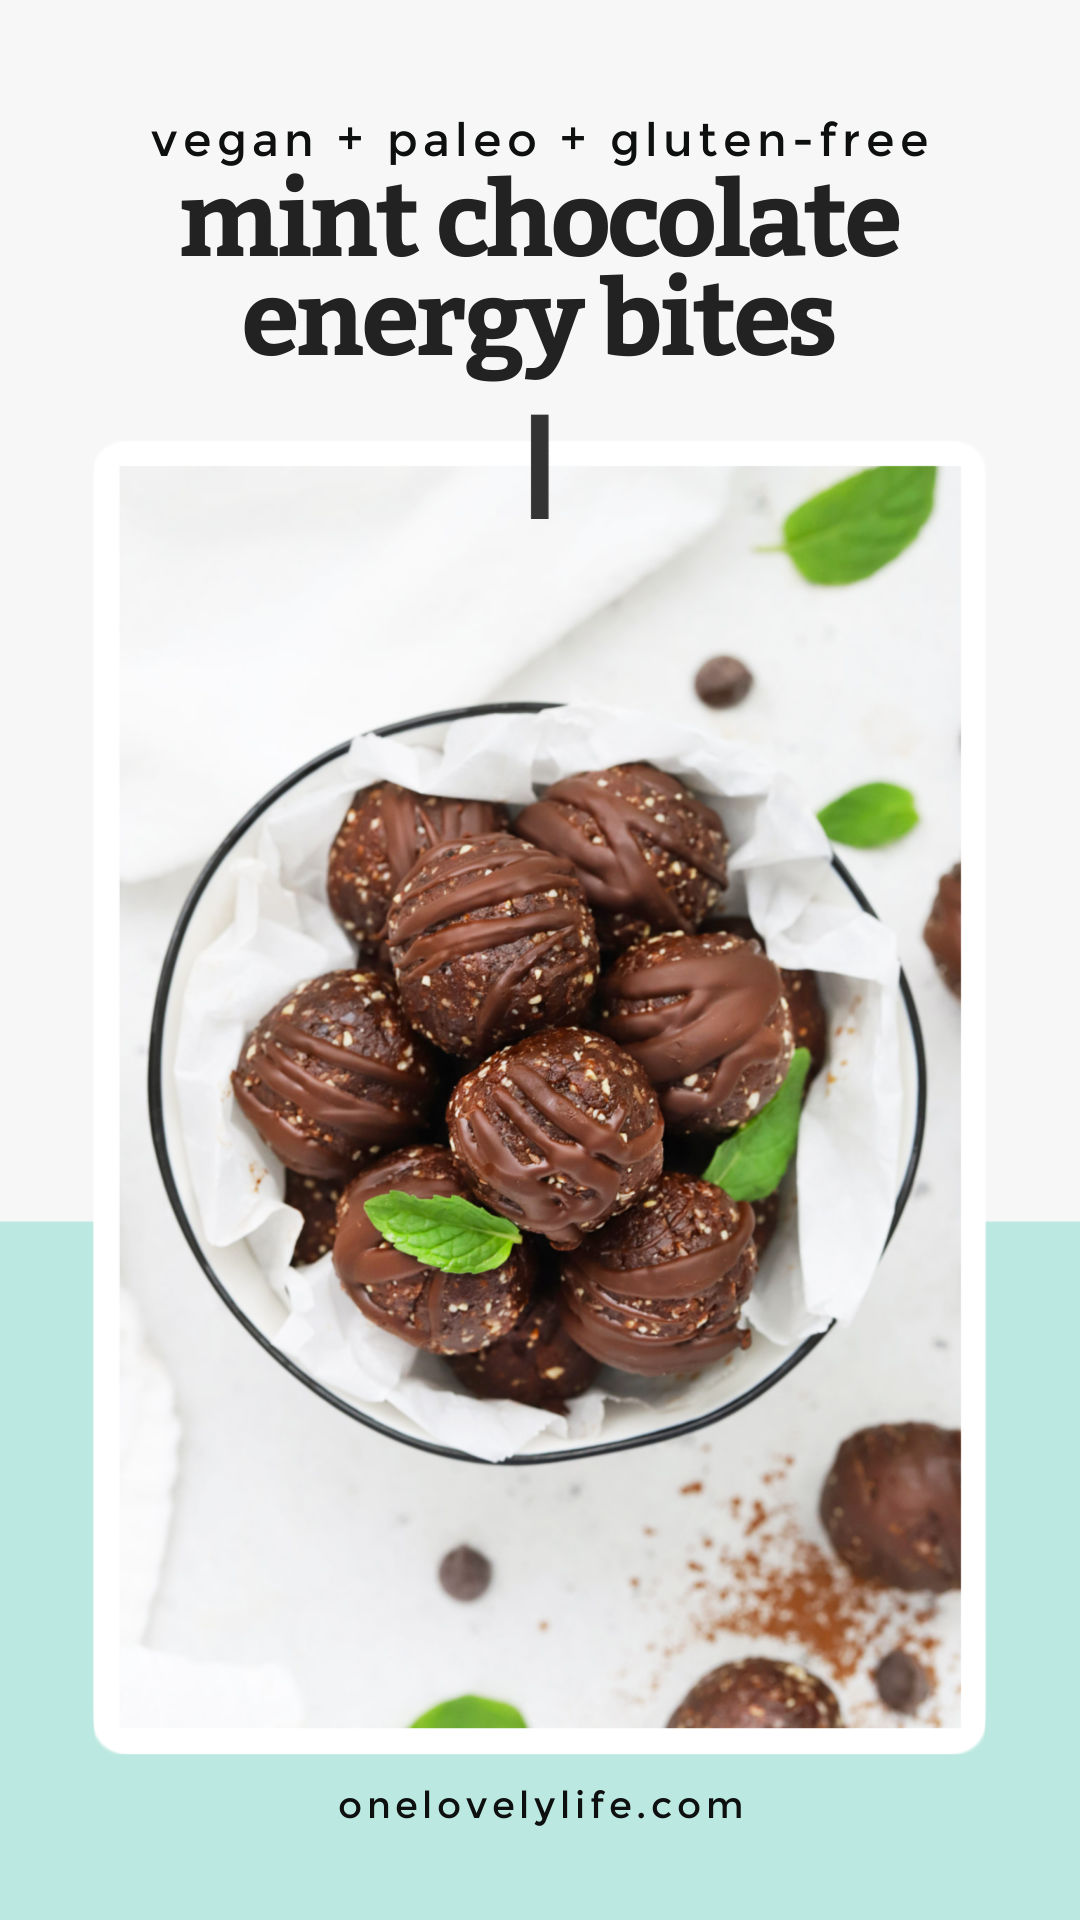 Thin Mint Energy Bites - These Mint Chocolate Energy Bites are a delicious snack or healthy treat! Made with simple ingredients, they're great for meal prep. (Vegan + Paleo + Gluten-Free) // Thin Mint Energy Bites // Mint Brownie Energy Bites // Chocolate Peppermint Energy Bites // Healthy Snack // Meal Prep Snack // Mint Chocolate Energy Balls #vegan #glutenfree #paleo #energybites #energyballs